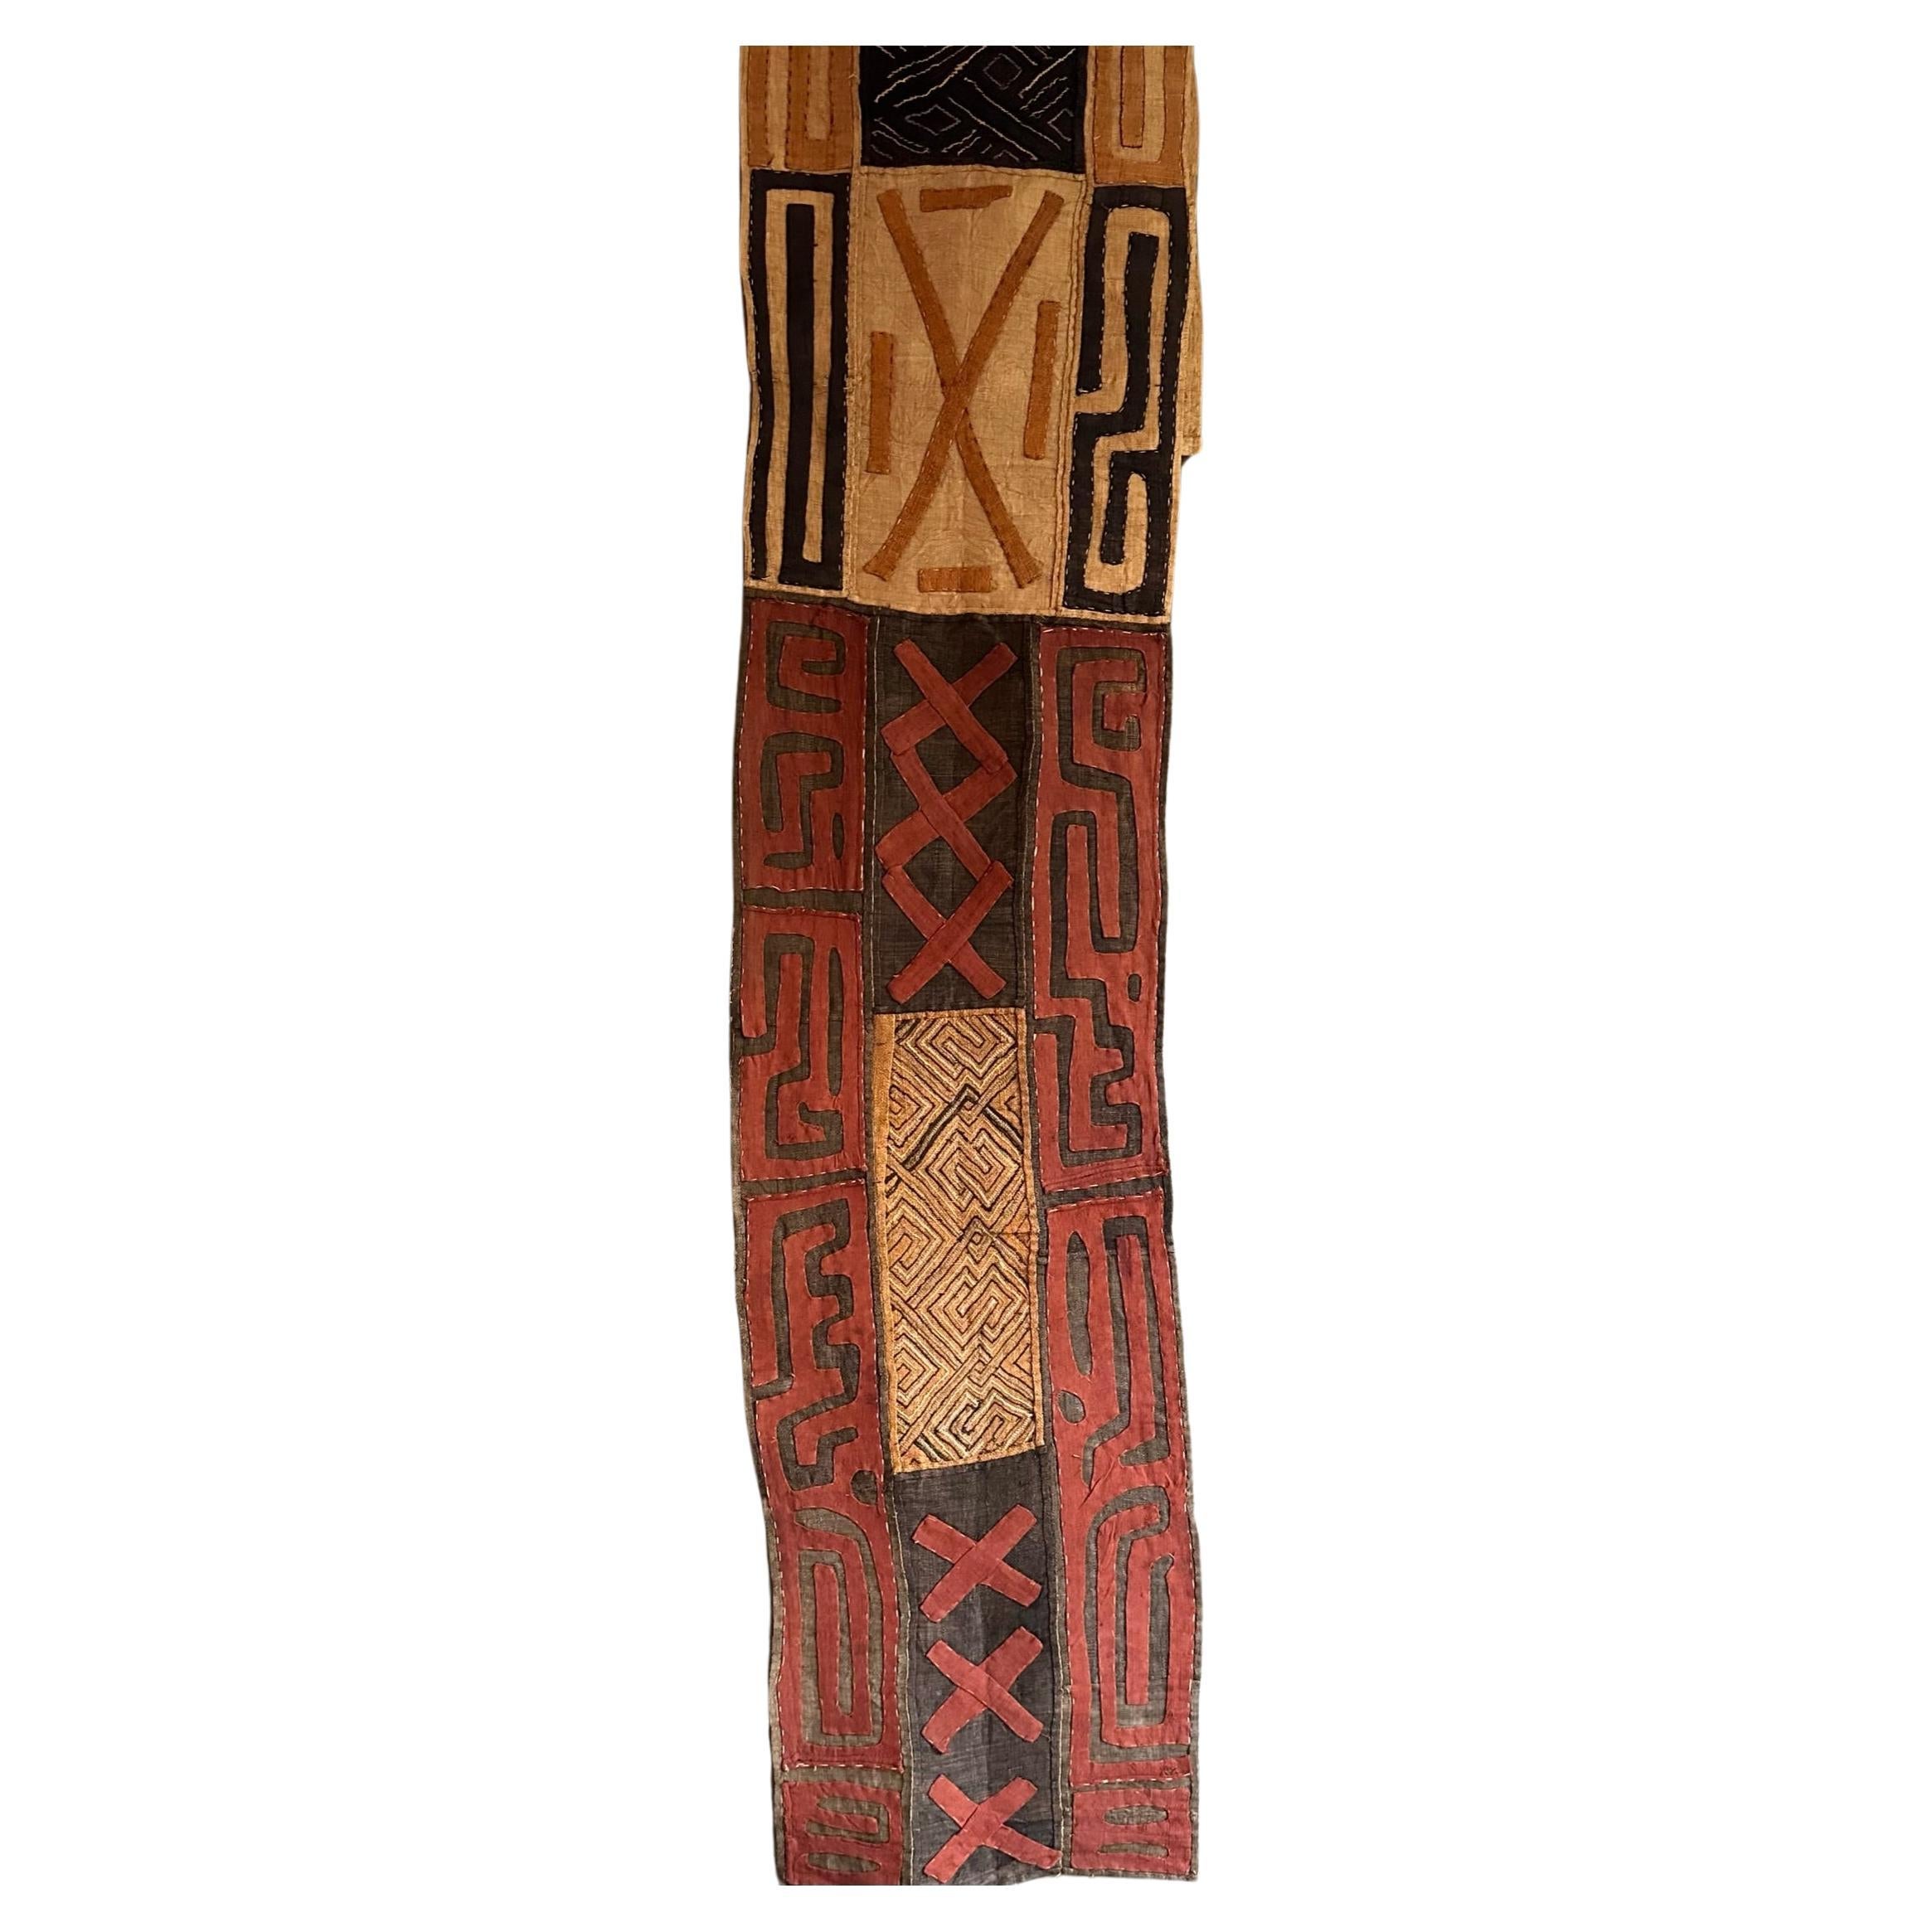 Early 20th century African Cuba cloth from the Congo